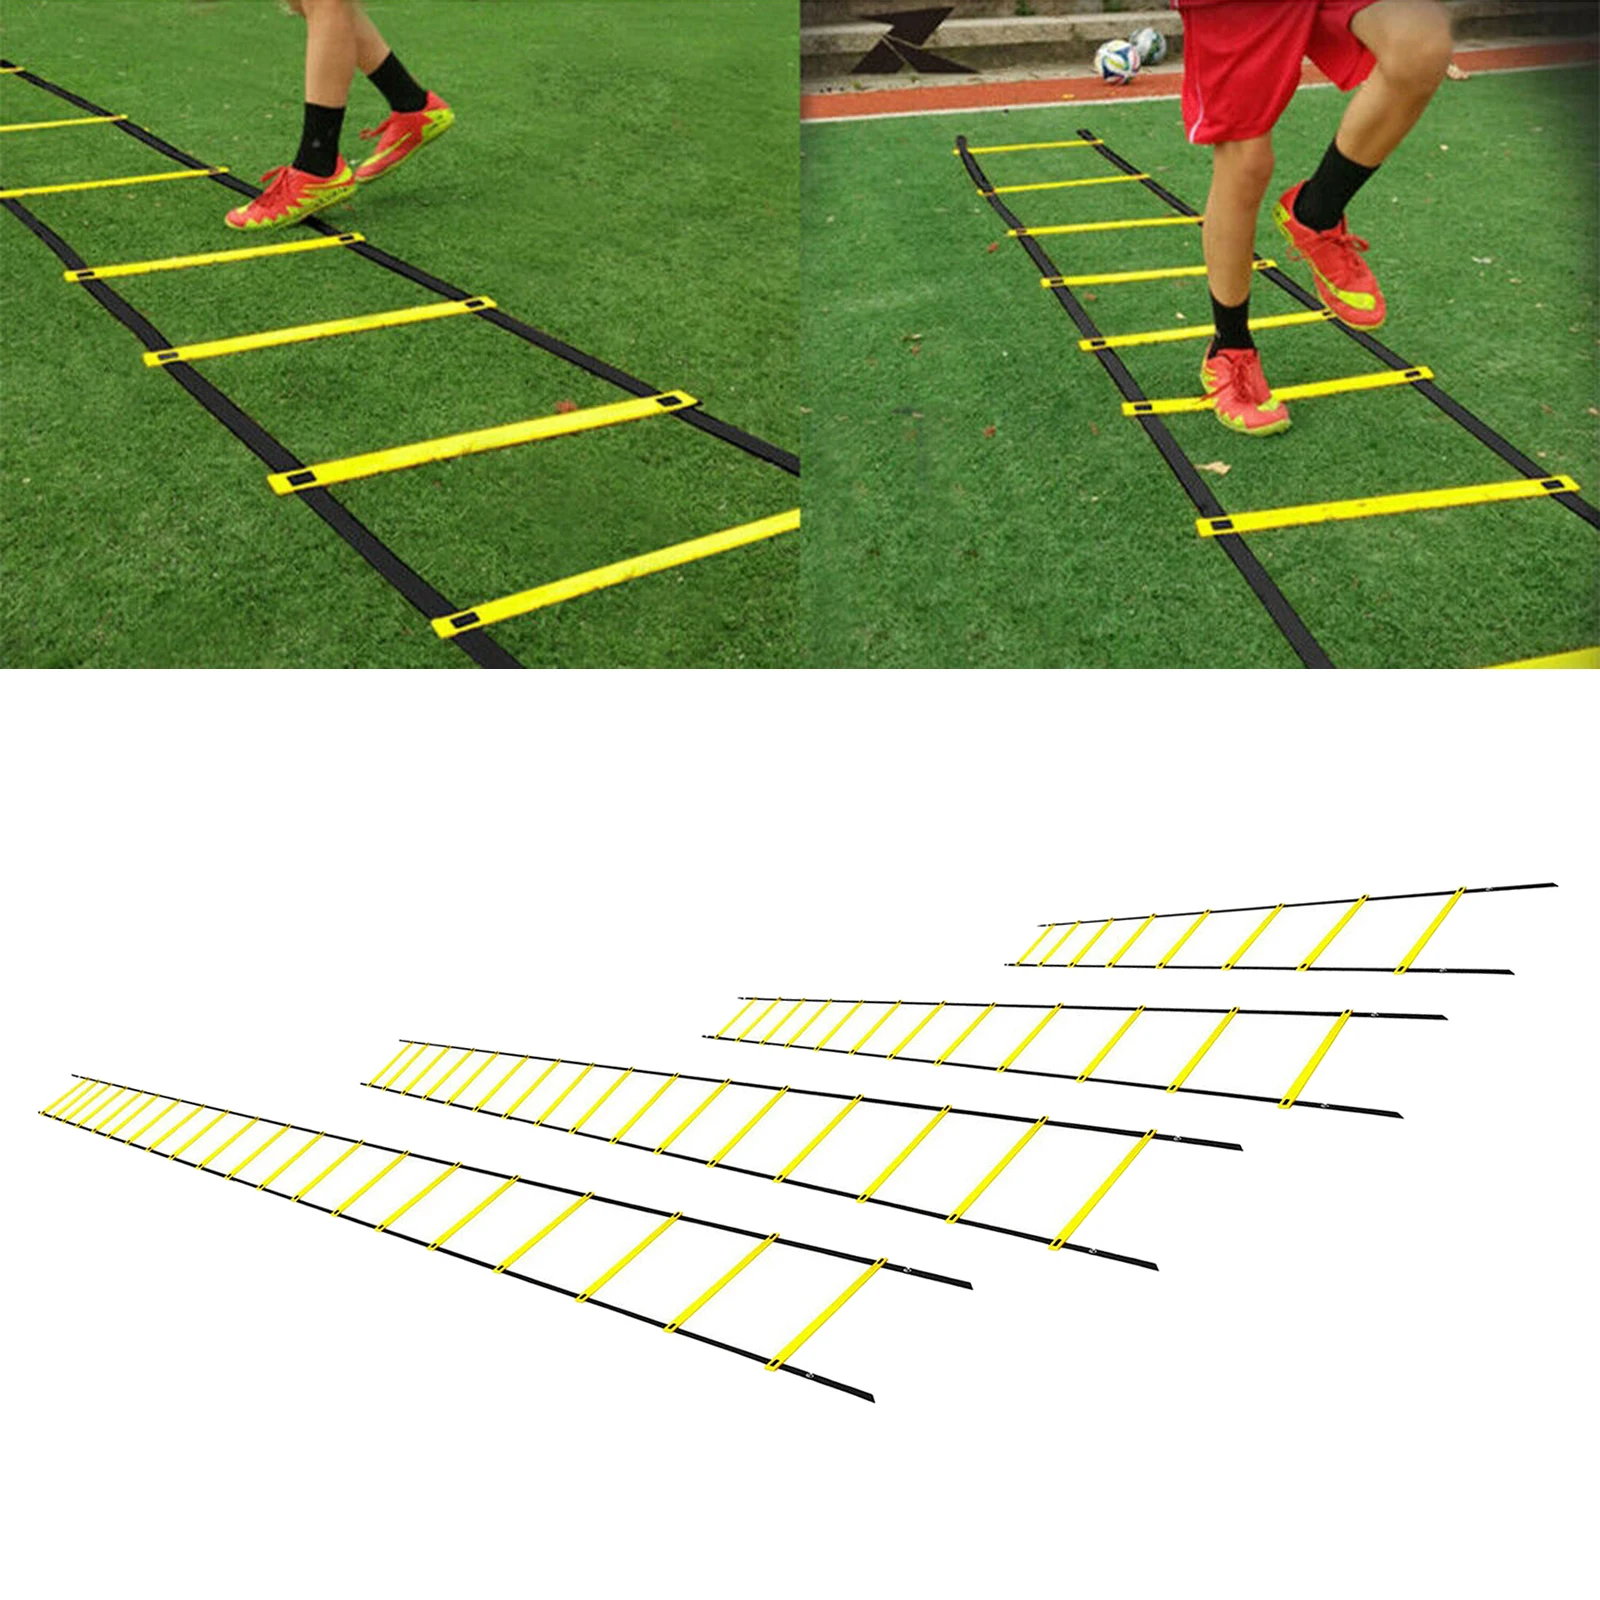 12 Rung 20Ft Agility Ladder,4 Steel Stakes & Carrying Bag,Footwork Equipment for Soccer Football Boxing Drills KUACALL Speed Training Ladder Agility Training Set 